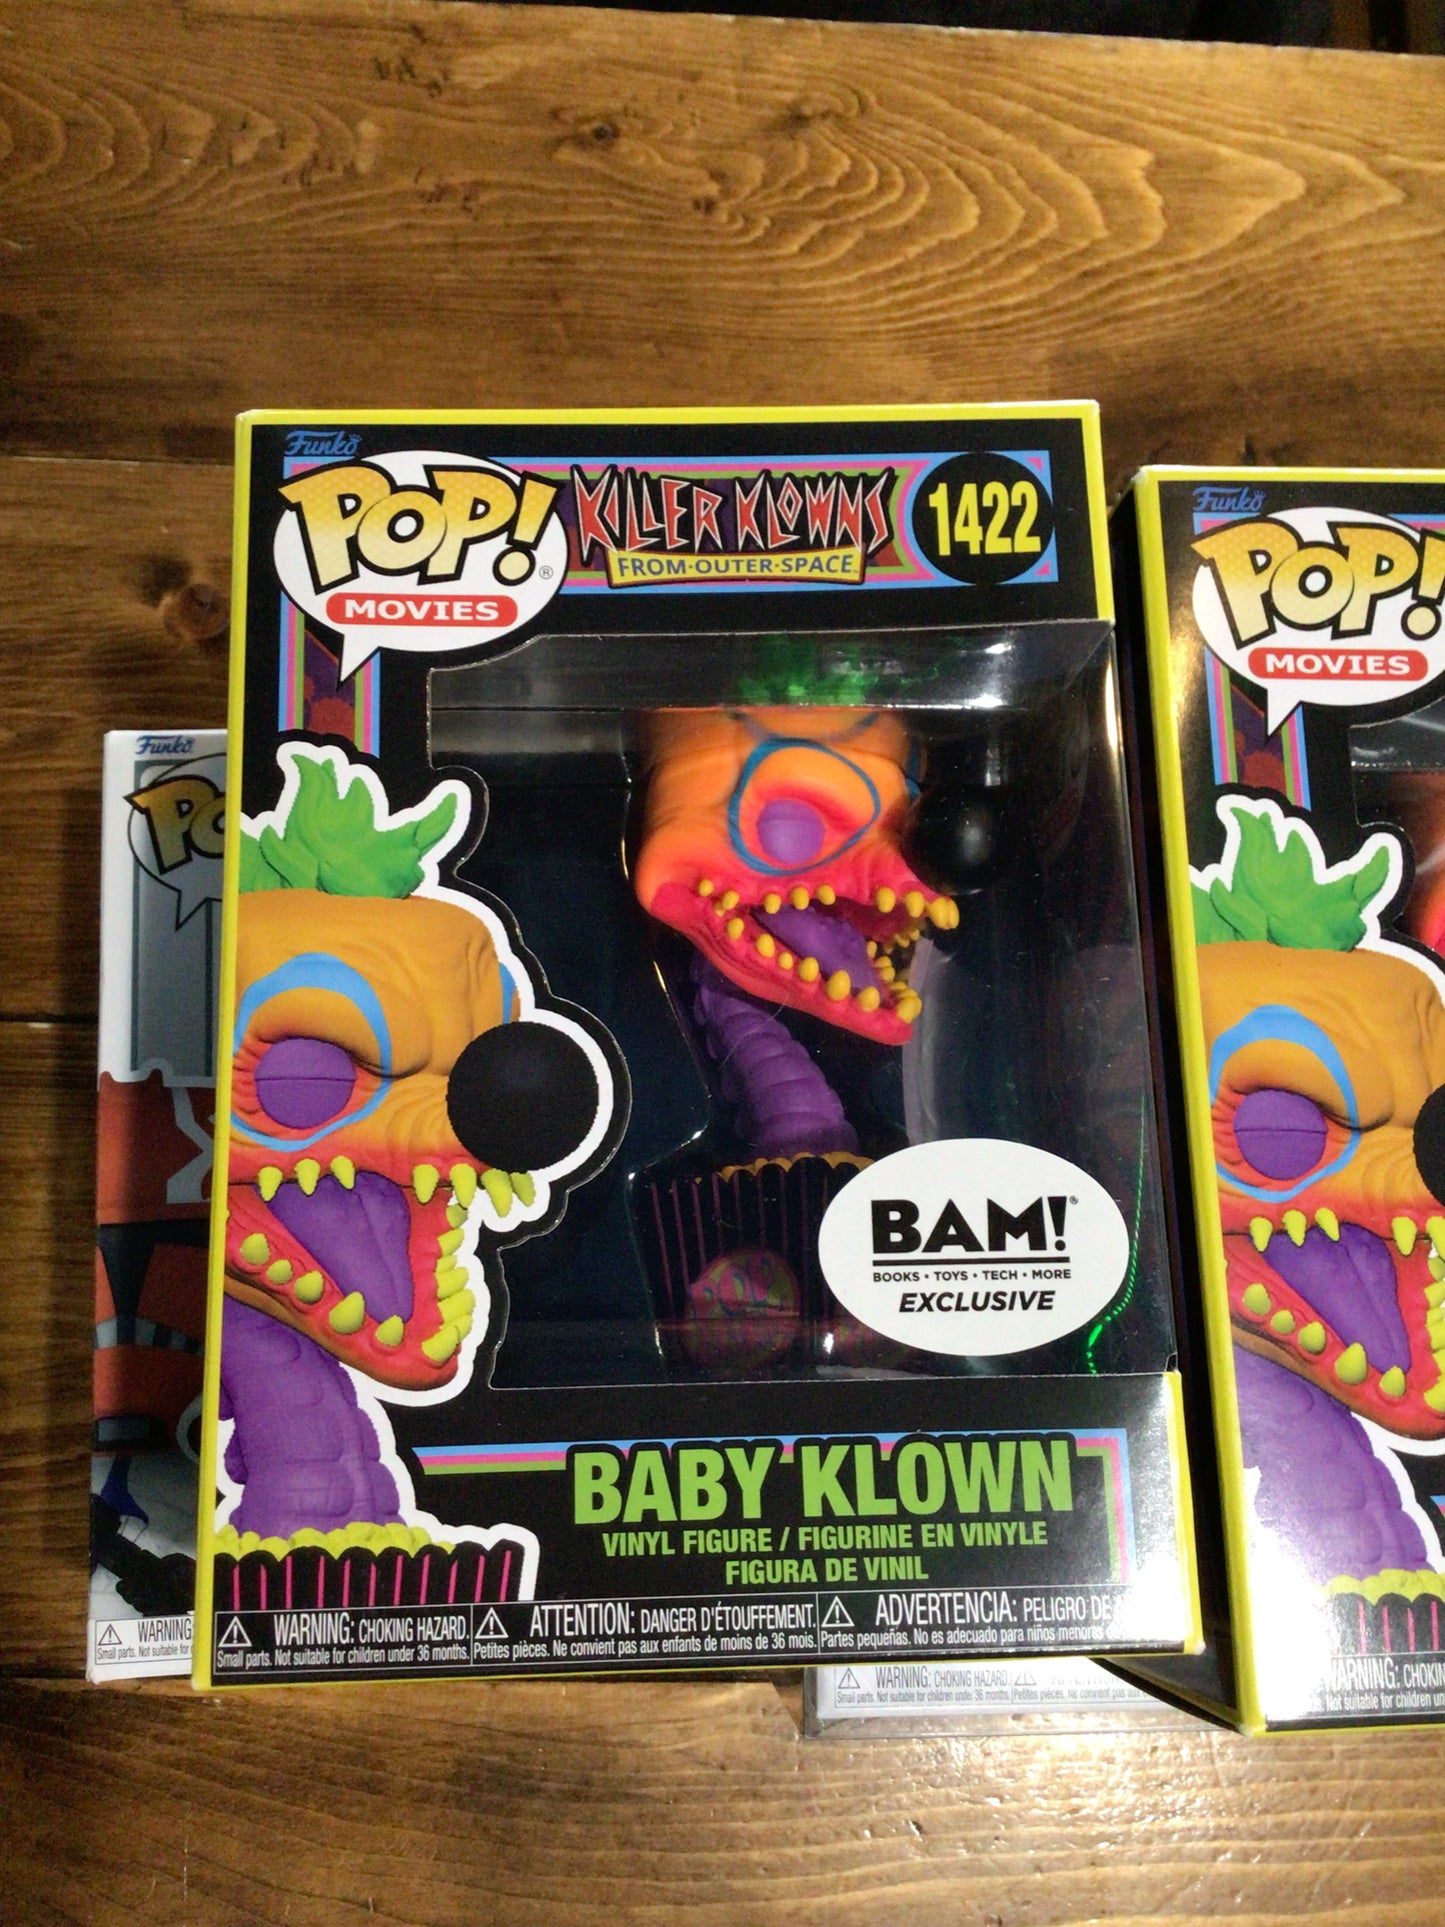 Killer Klowns from Outer Space - Baby Klown #1422 - Funko Pop! Vinyl Figure (Movies)